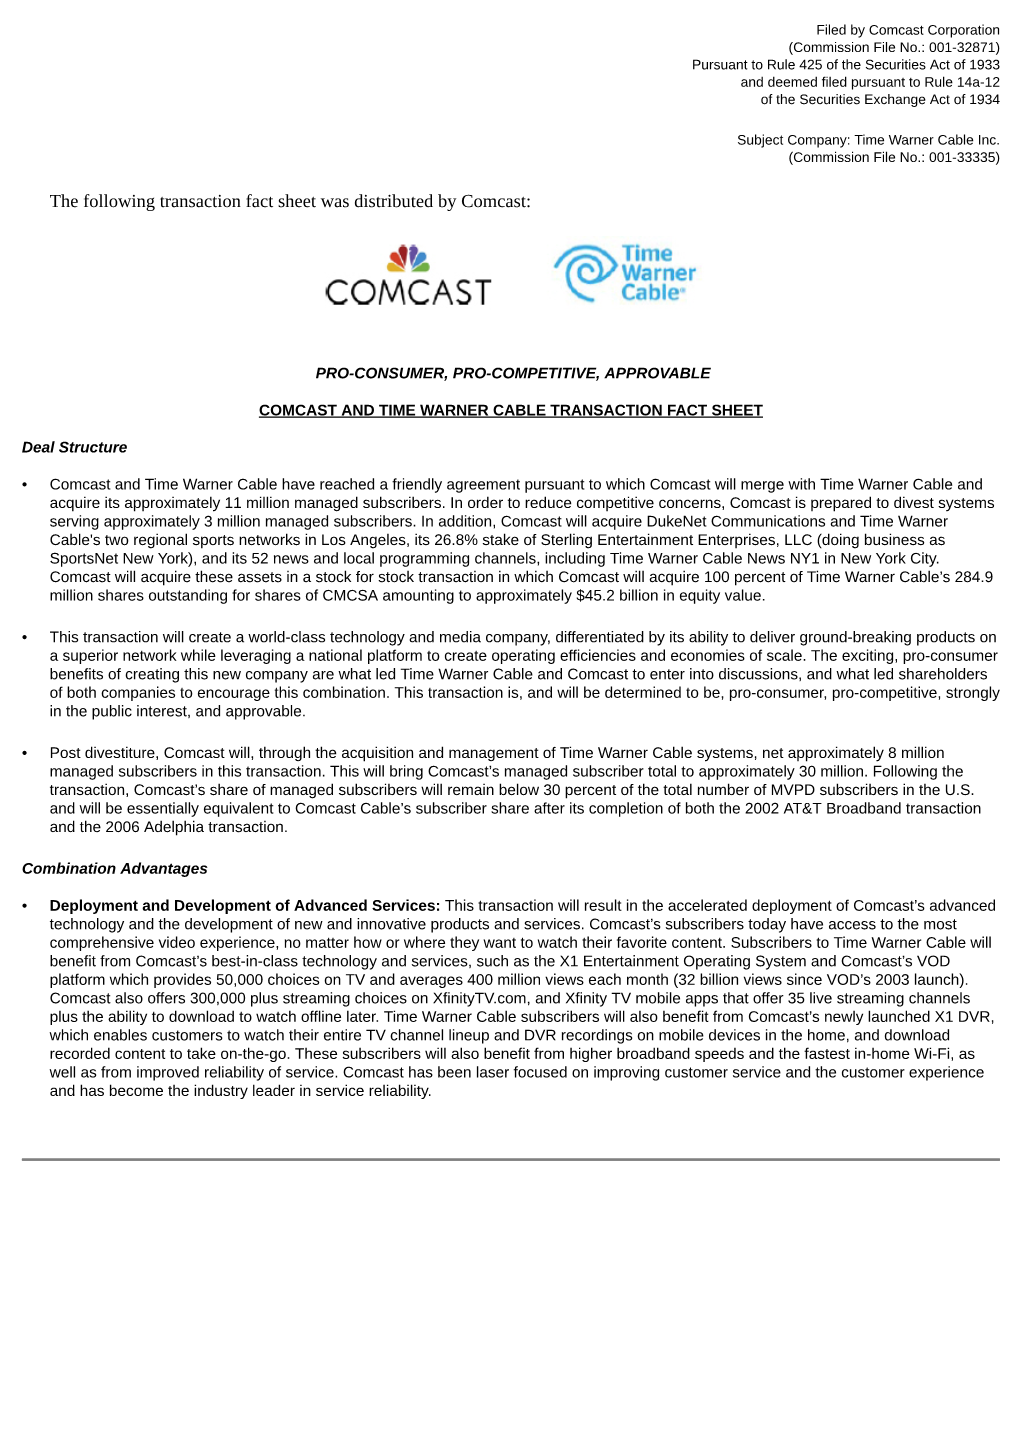 The Following Transaction Fact Sheet Was Distributed by Comcast